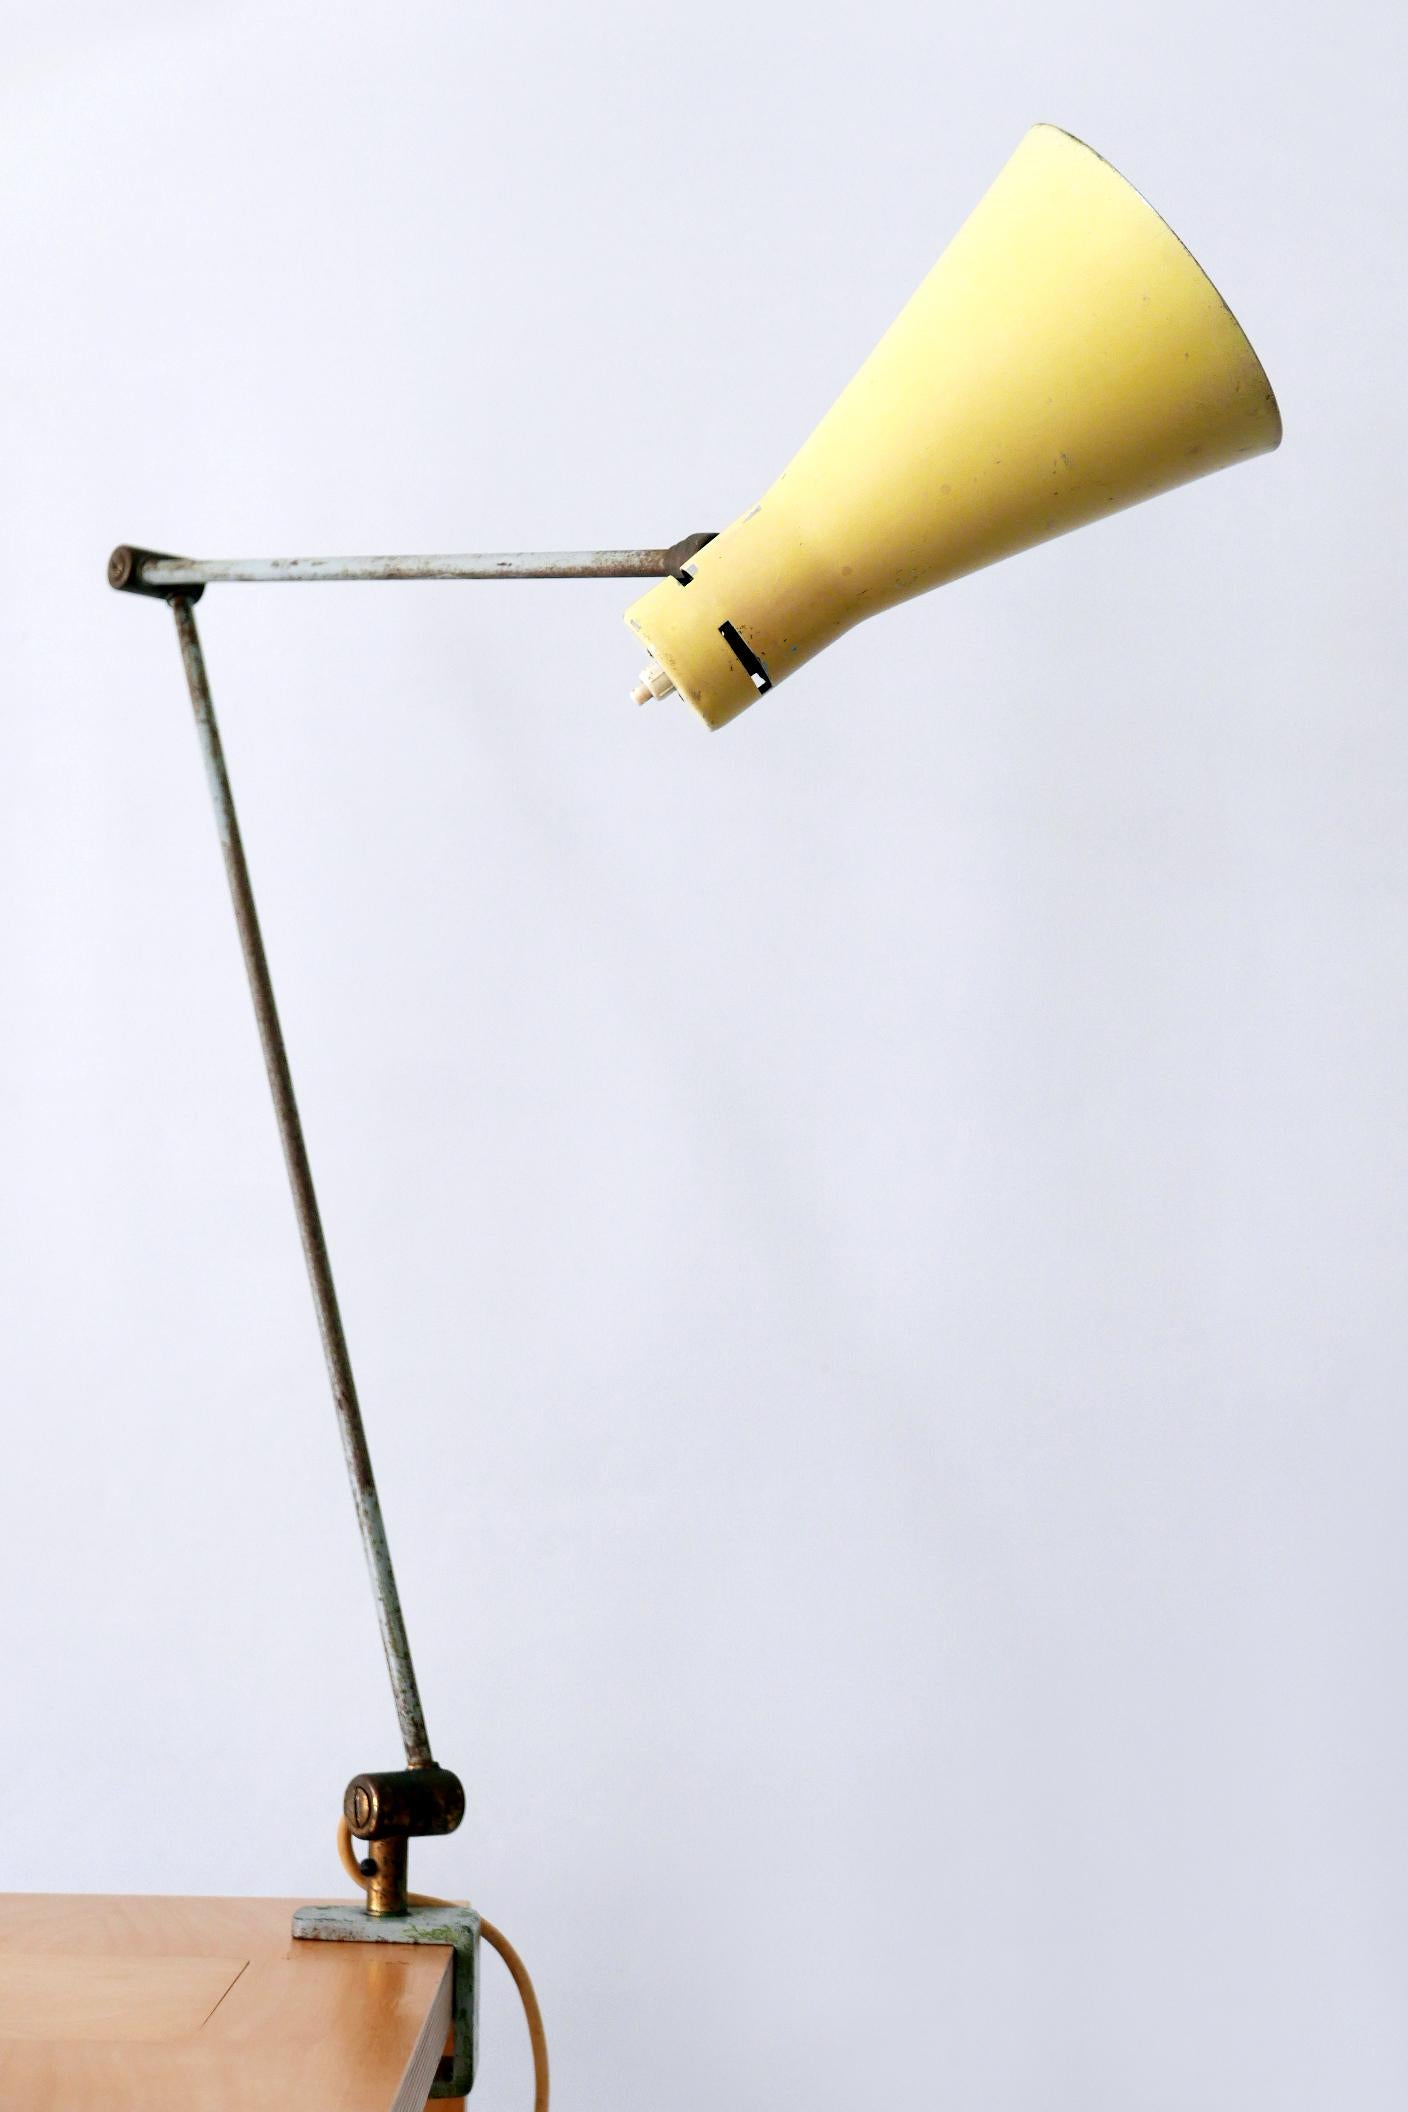 Enameled Articulated Clamp Table Light or Task Lamp by Vittoriano Vigano for Arteluce For Sale